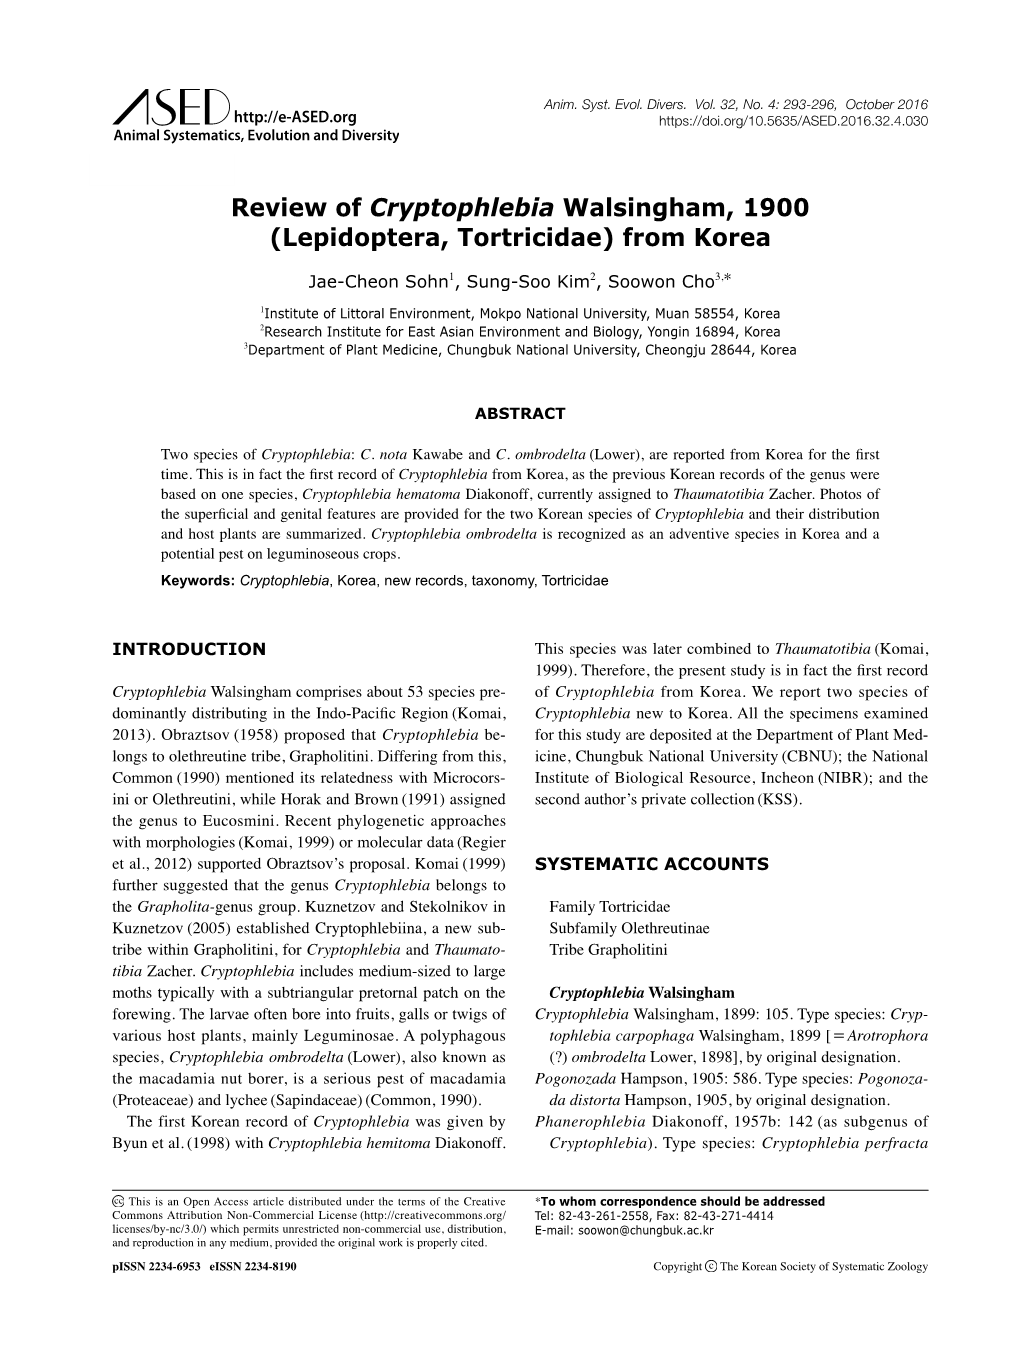 Review of Cryptophlebia Walsingham, 1900 (Lepidoptera, Tortricidae) from Korea